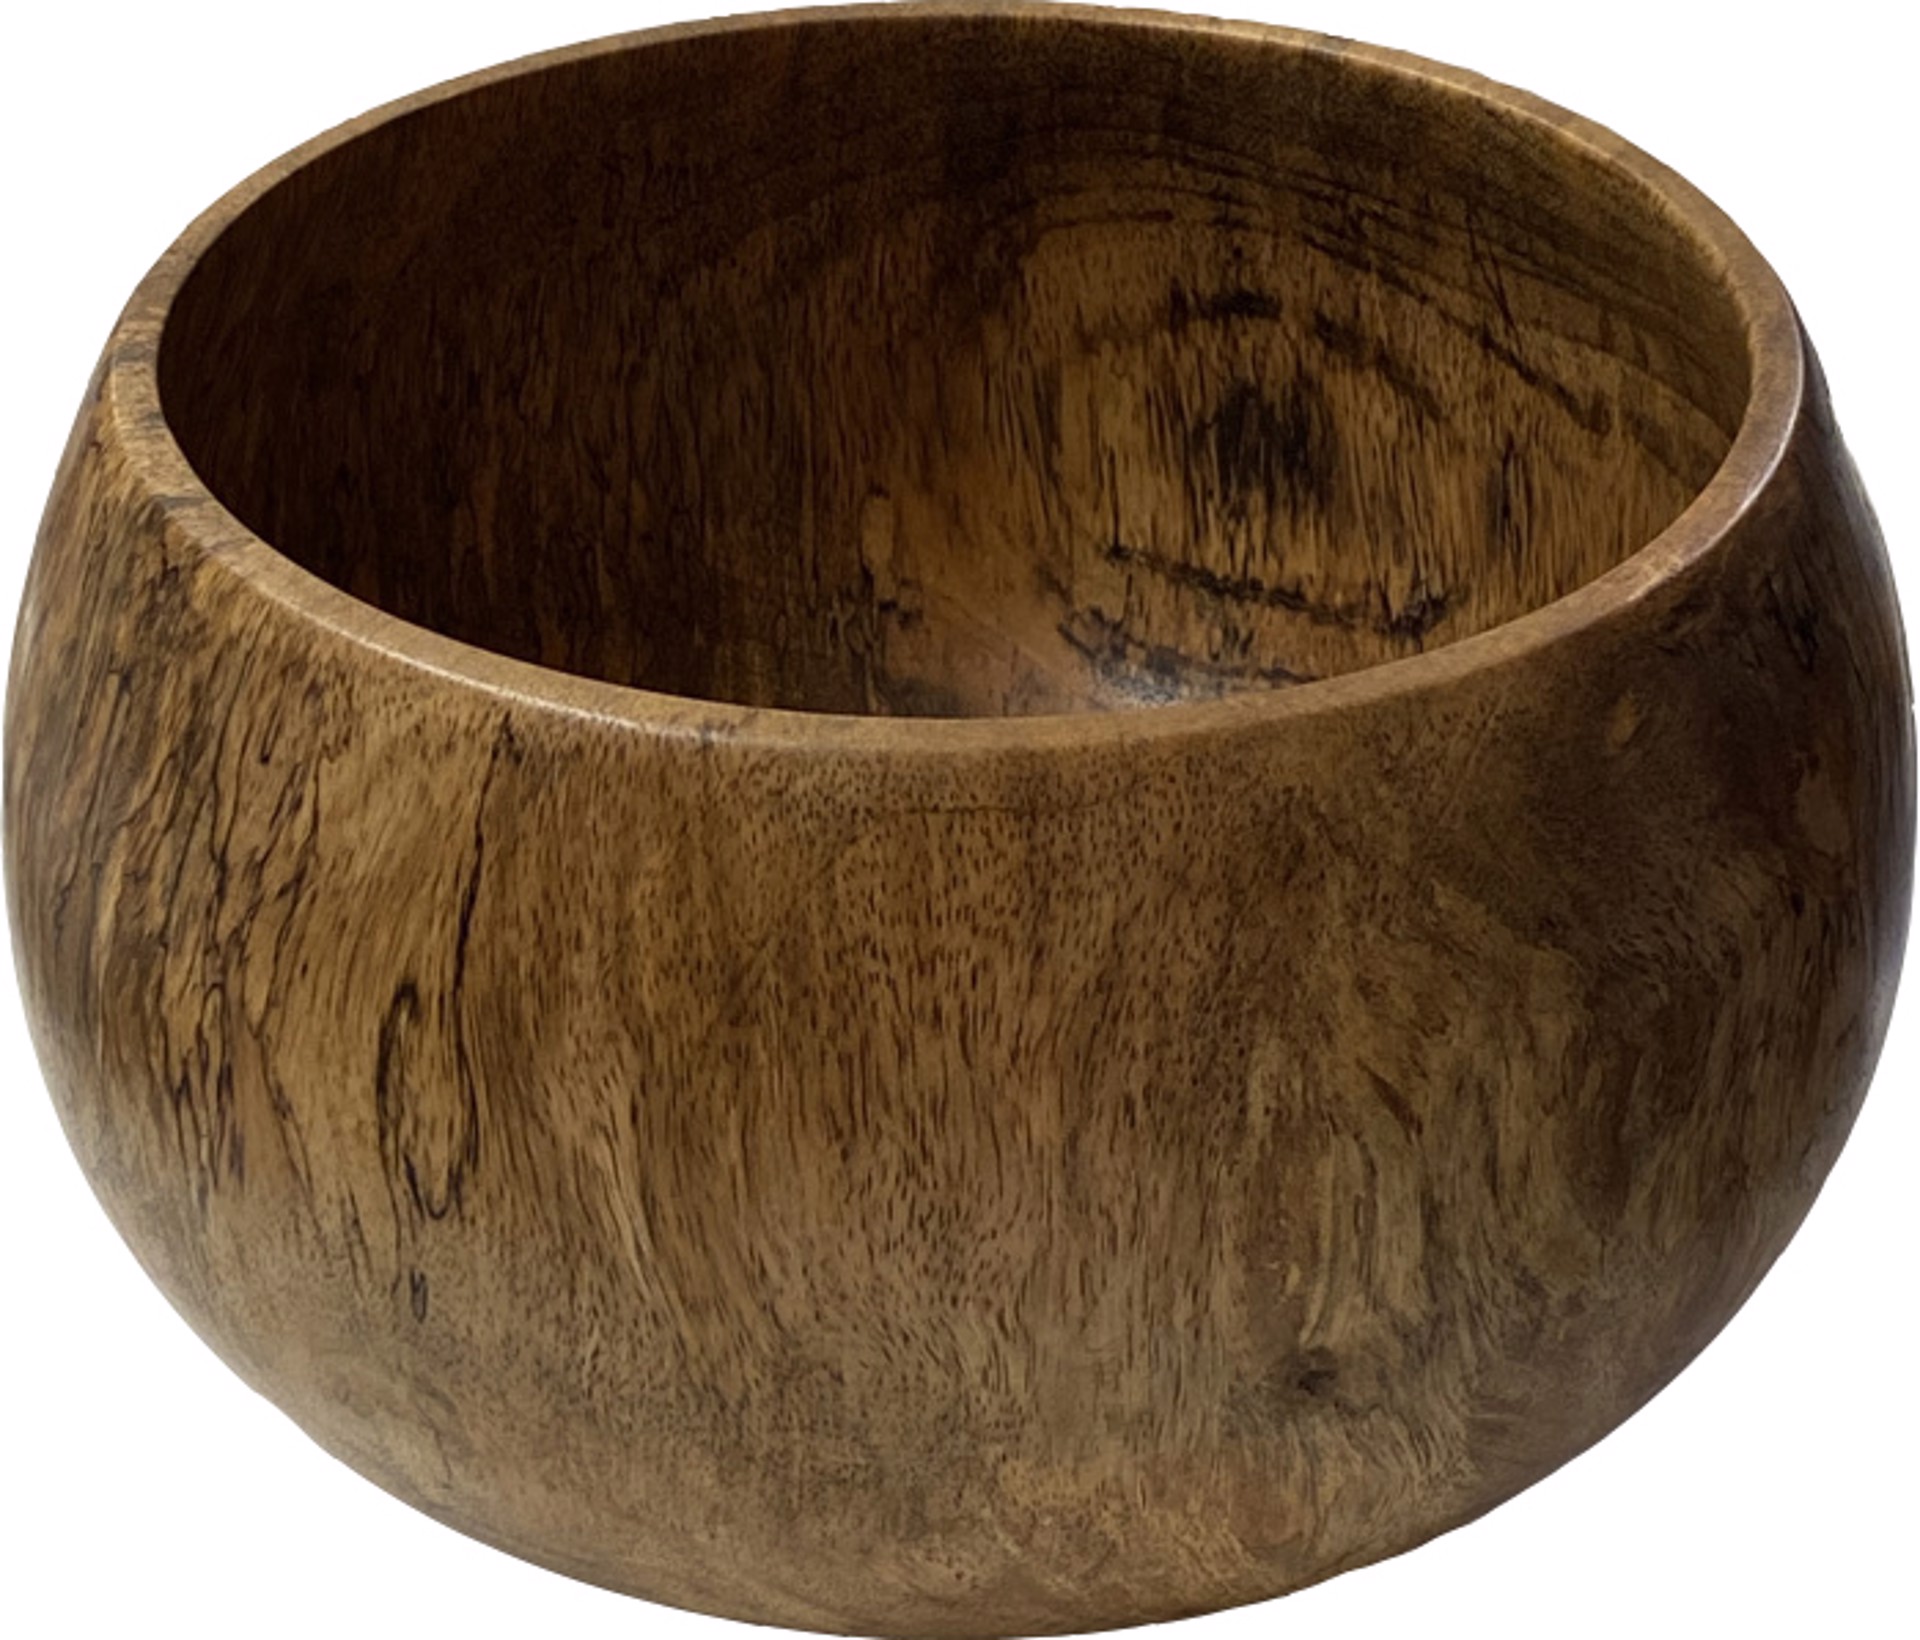 Mango Wide Bowl with Spalting by John Fackrell